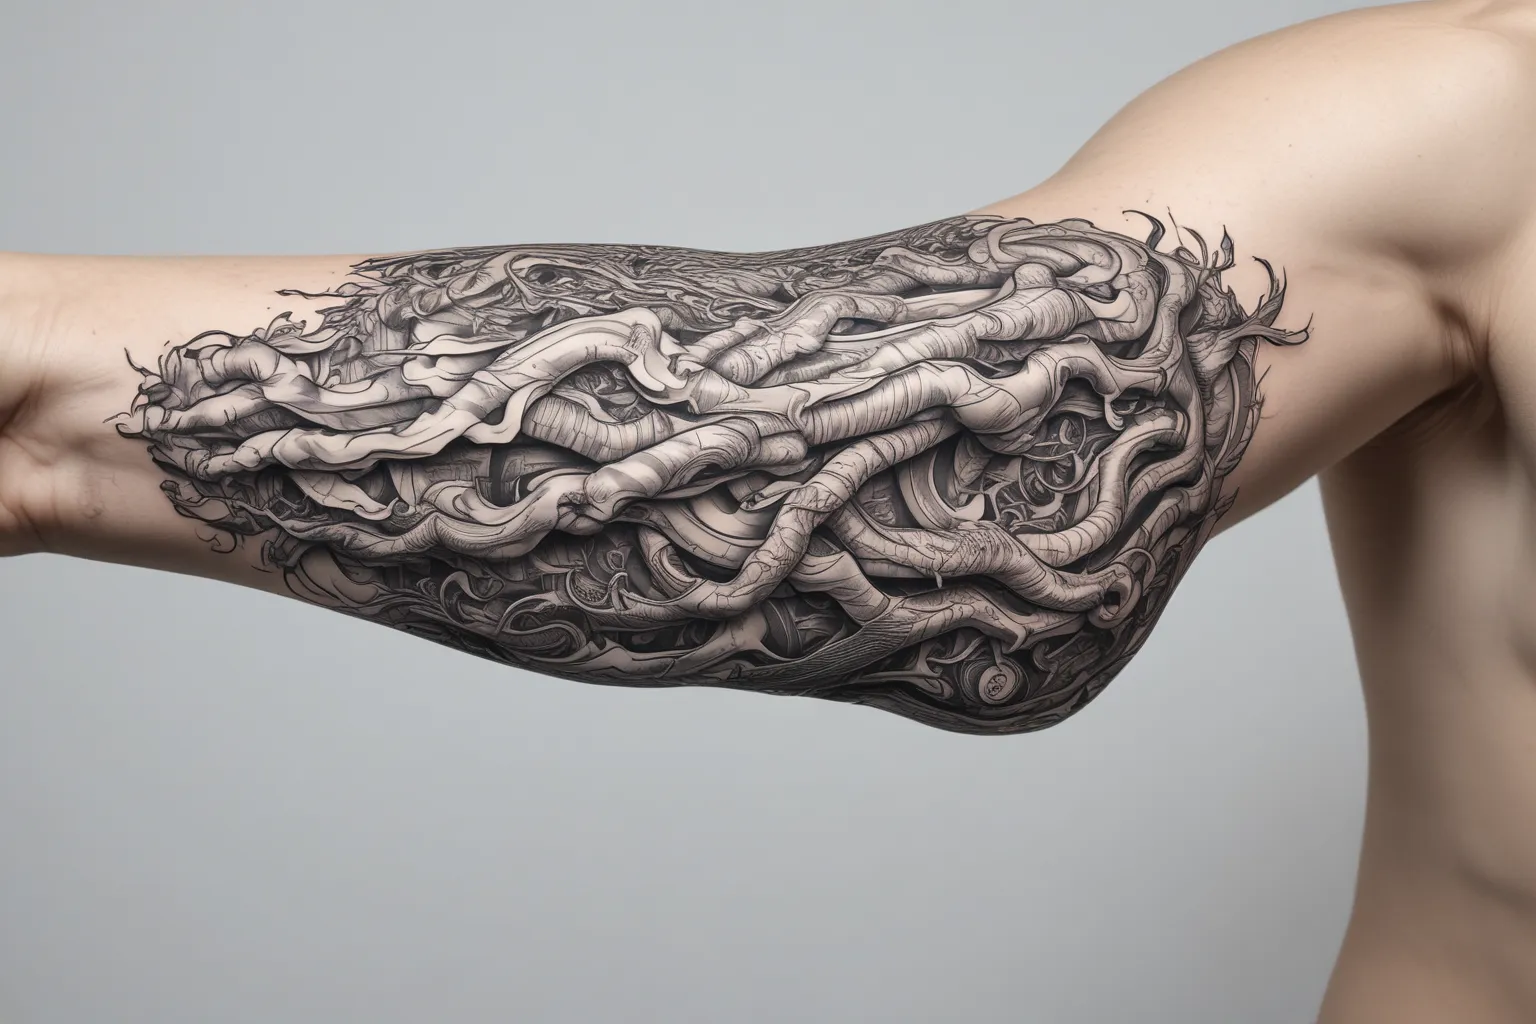 inner elbow crook of the arm ,a vein tattoo of the basilic mcephalic and median cubicle veins in 3d effect 入れ墨